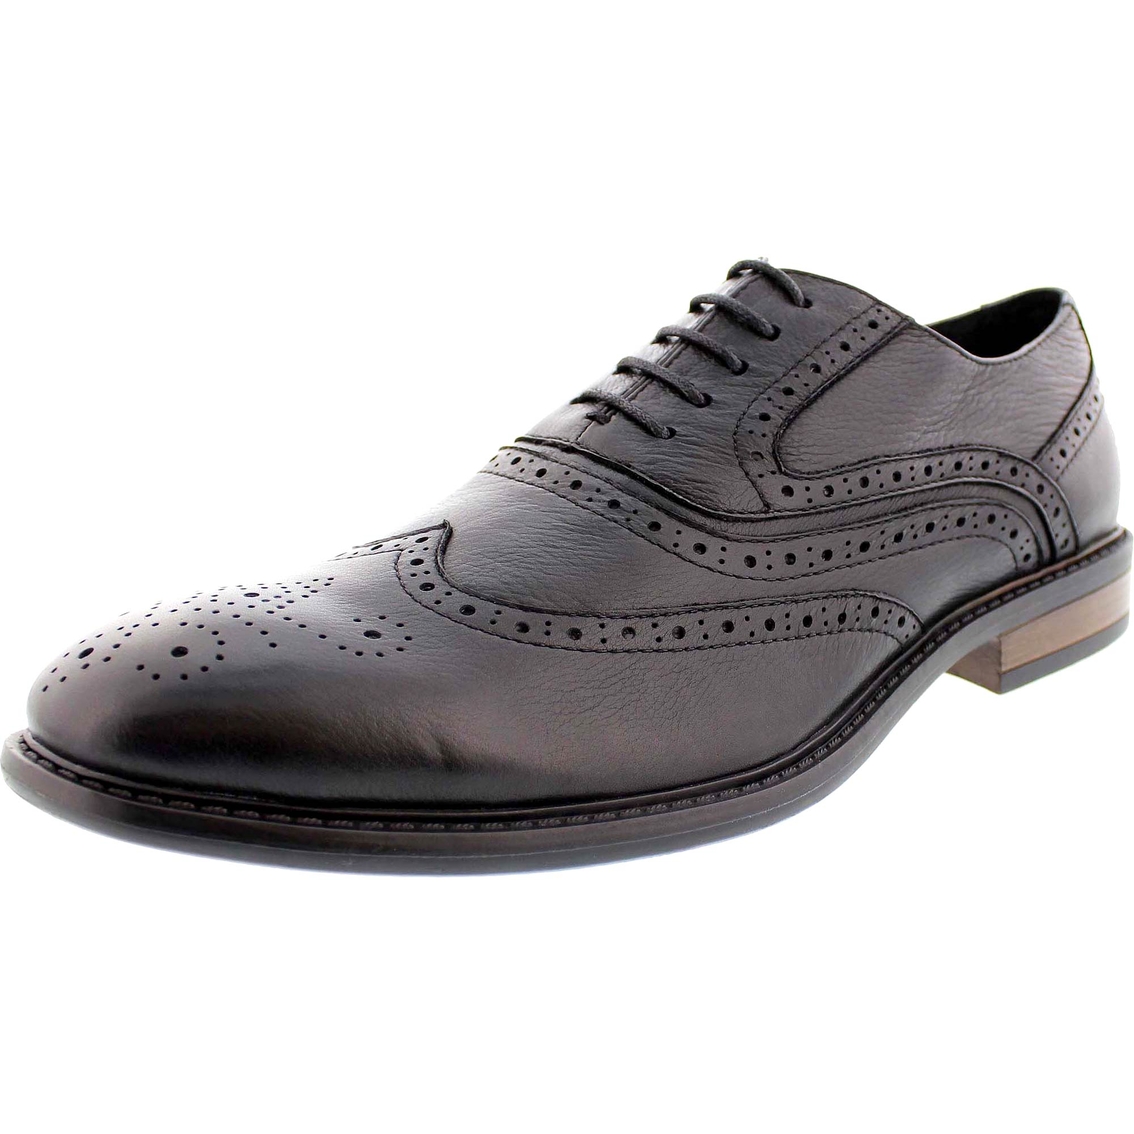 English Laundry Hyde Park Wingtip Leather Oxford Shoes | Dress ...